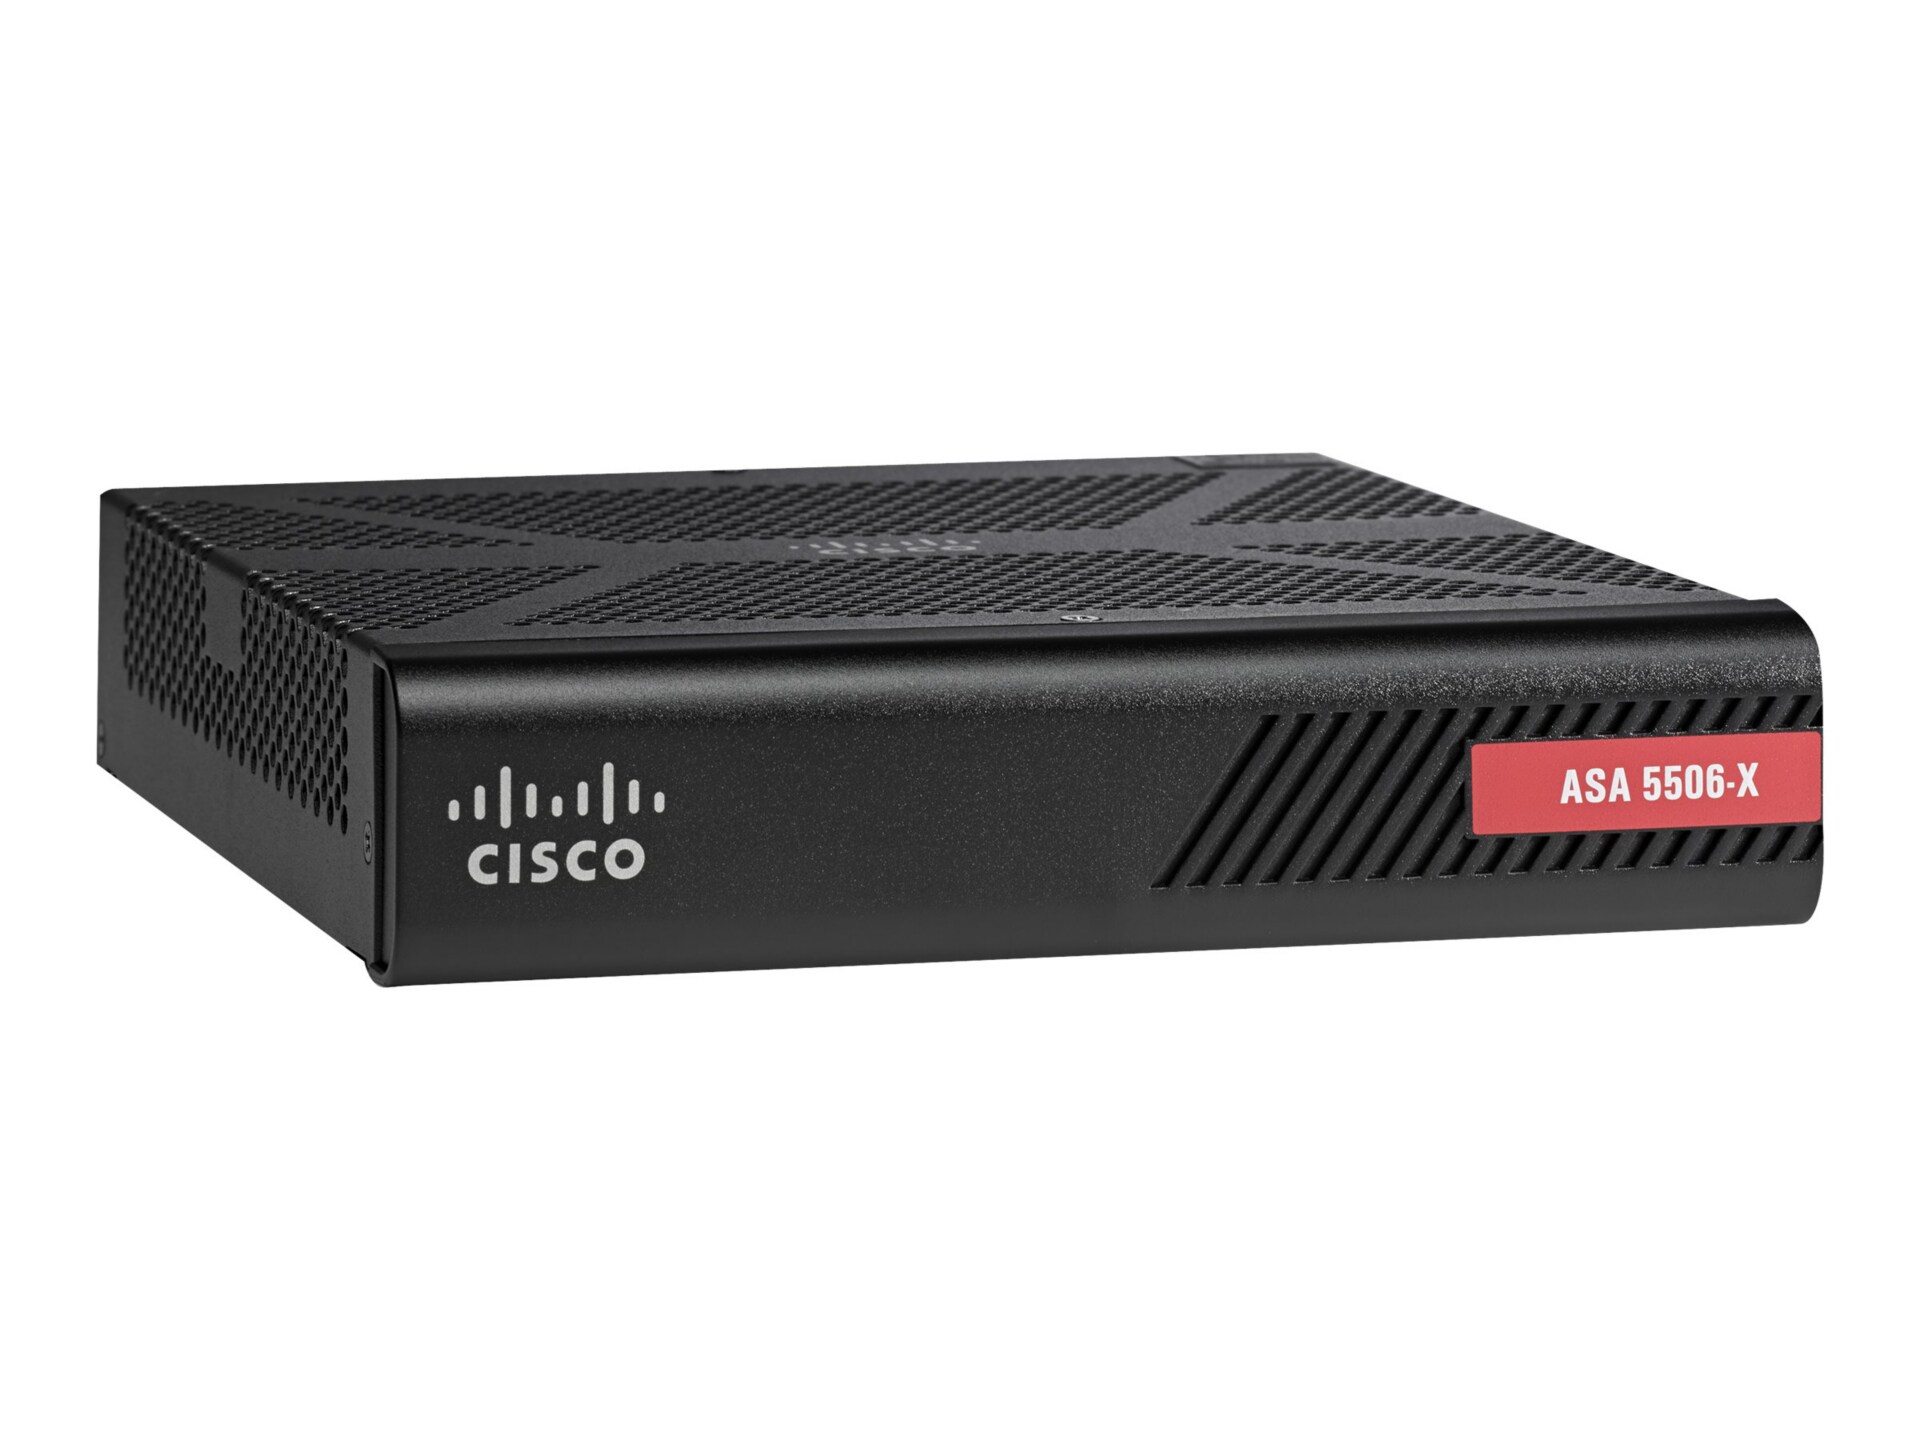 Cisco ASA 5506-X with Firepower Threat Defense - Hardware and Subscription